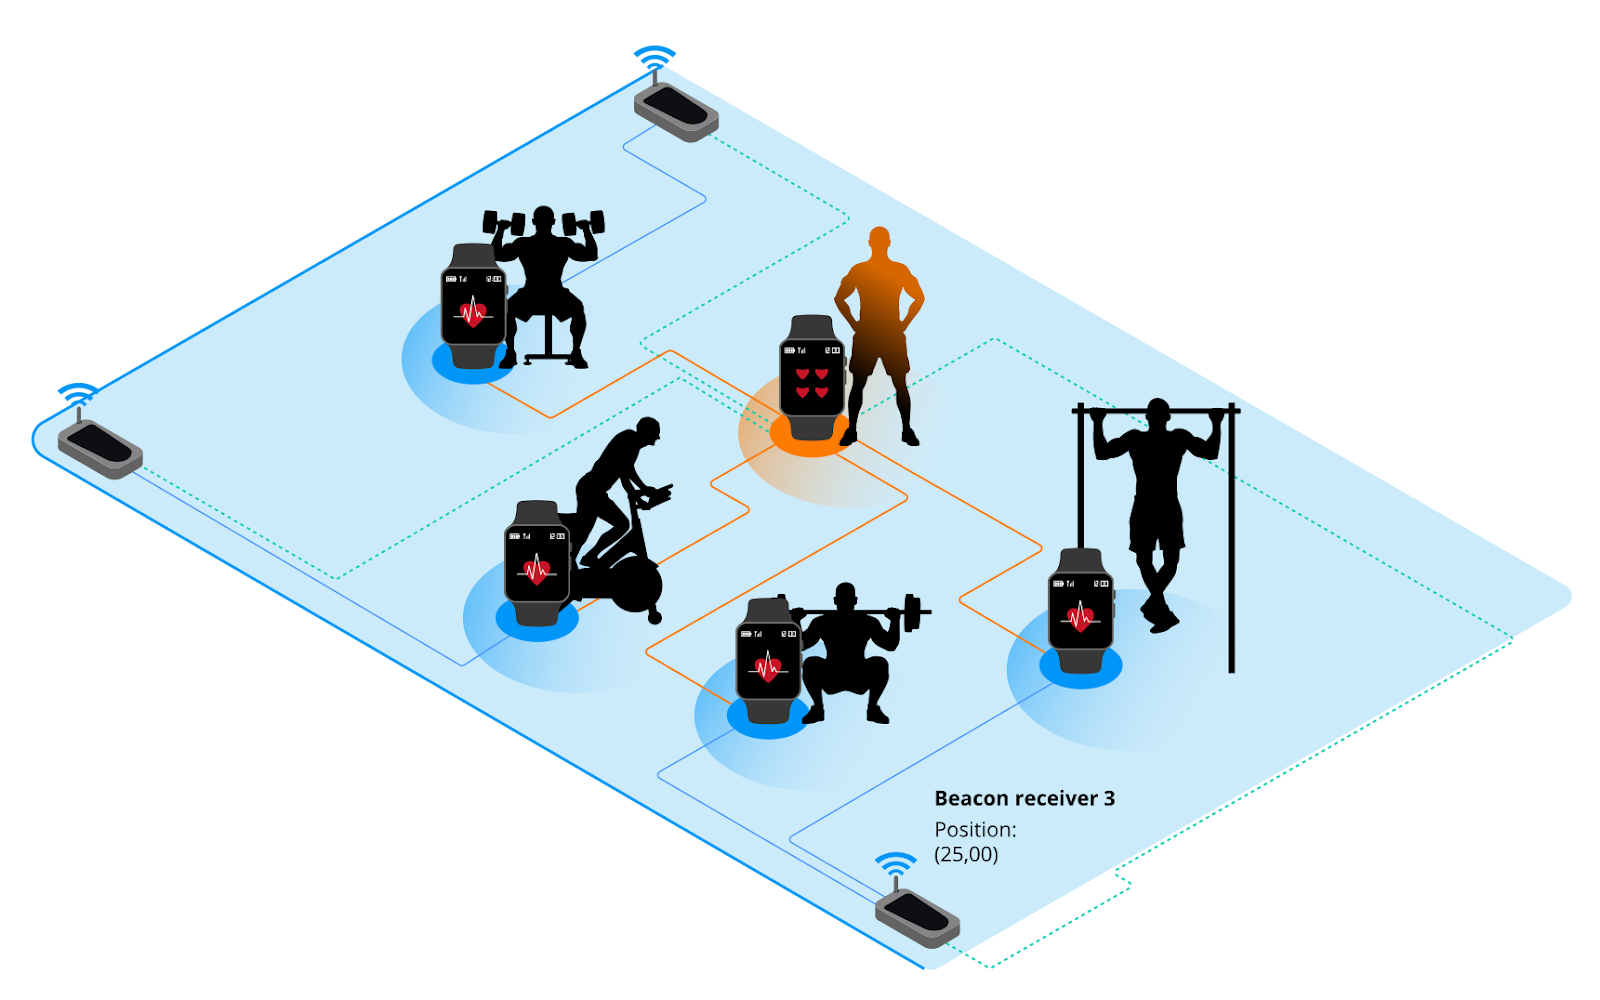 A scheme of the gym IoT system